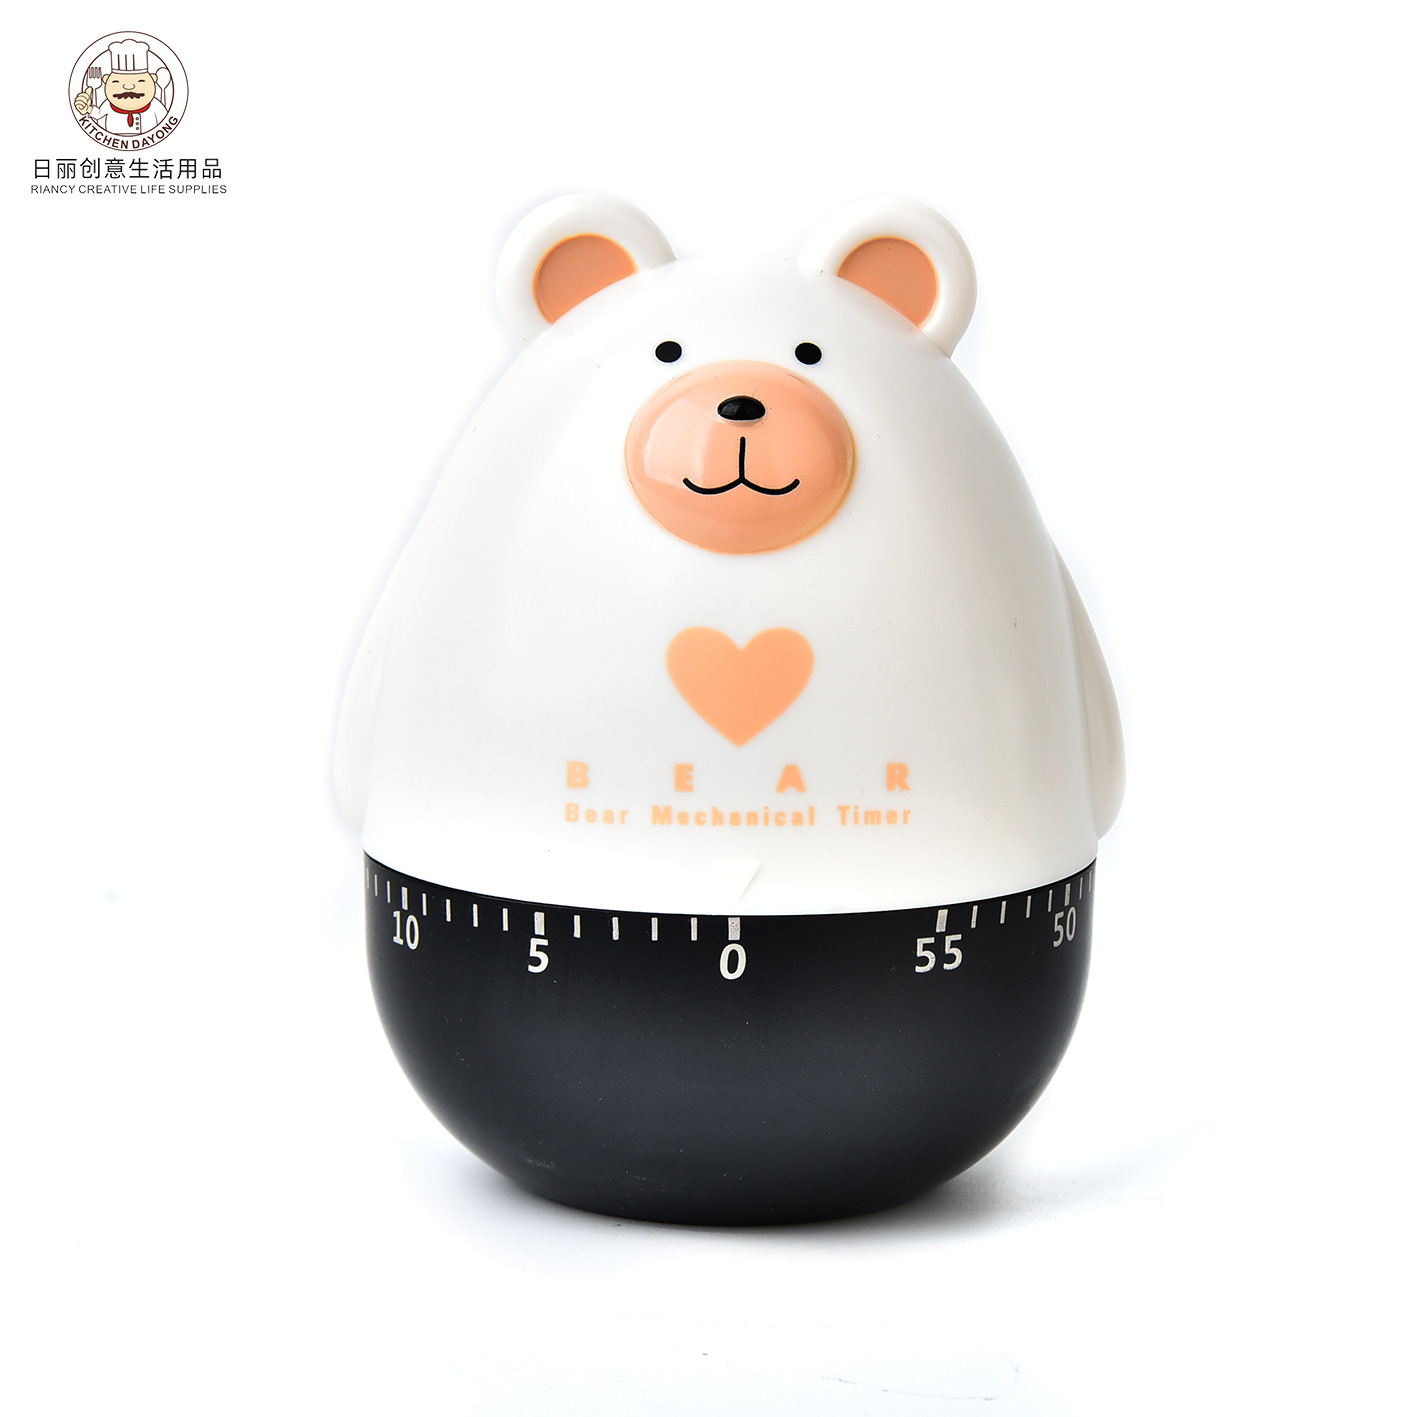 Creative Cartoon Tym Bear Mechanical Reminder Timer Cooking Learning Cooking Soup Timer Kitchen Supplies